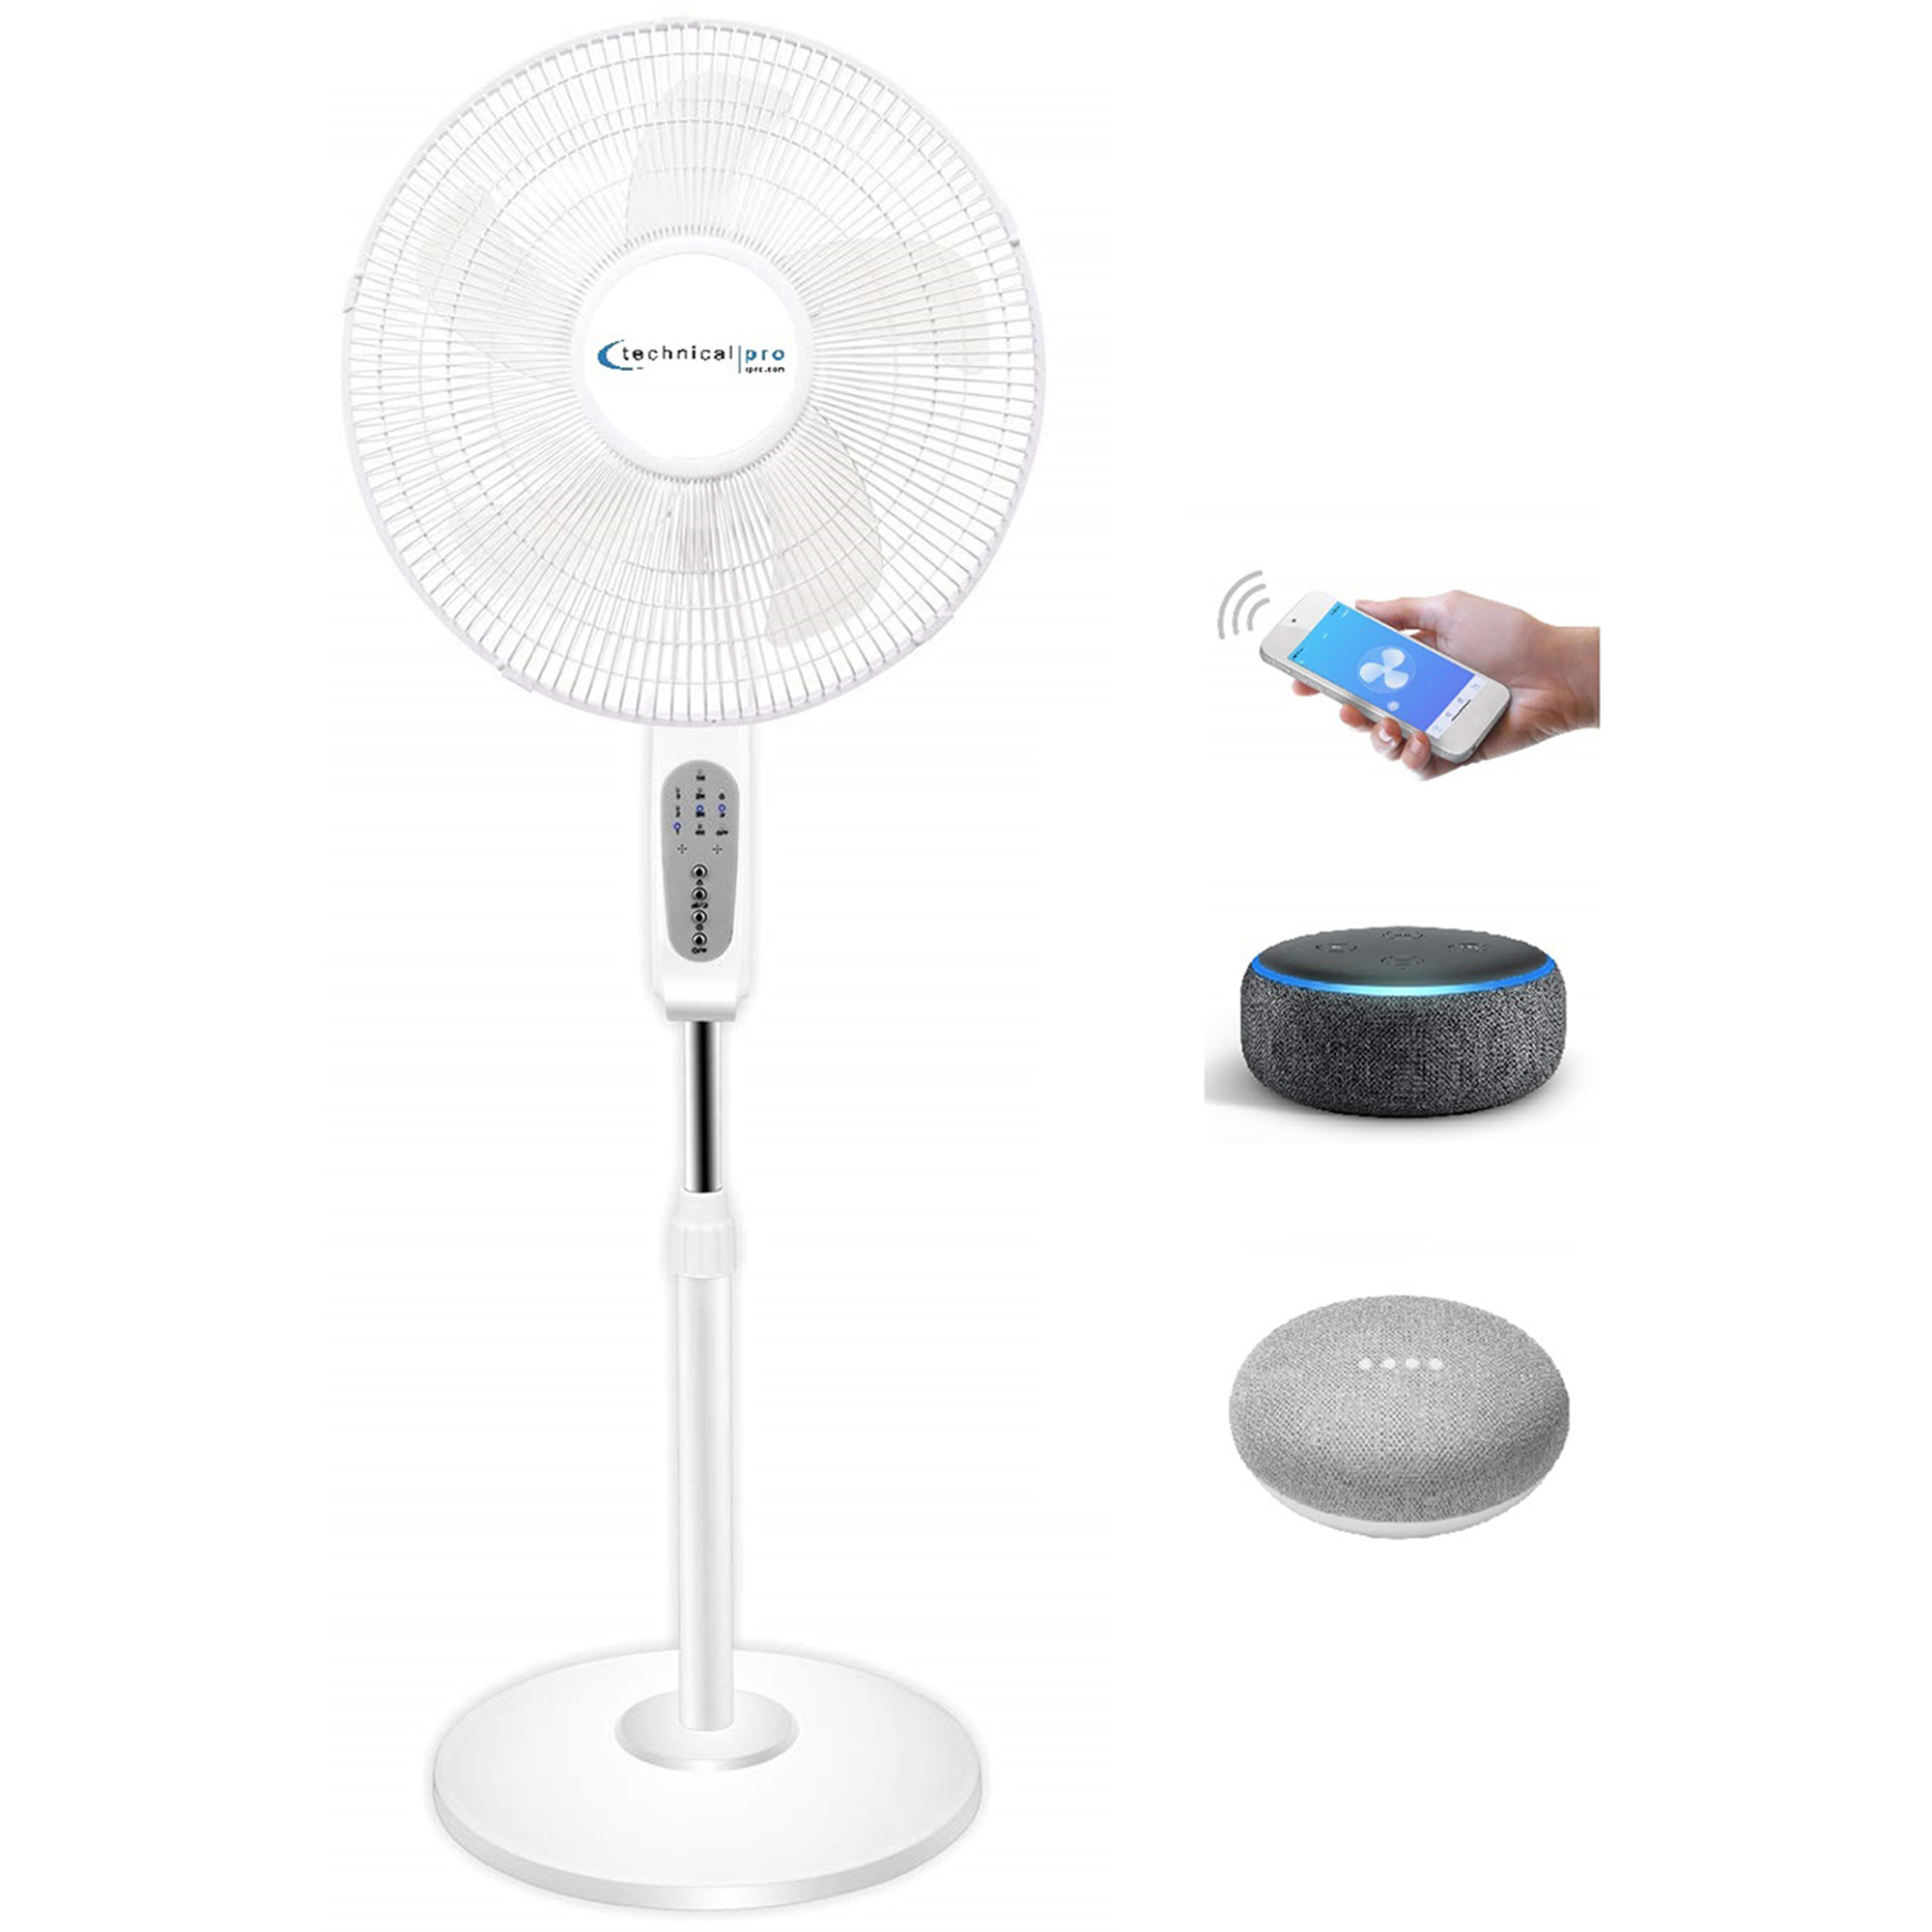 Technical Pro WIFI Enabled 16 Standing Fan With Oscillating Feature, Compatibe With Amazon Alexa/Google Home Voice Control